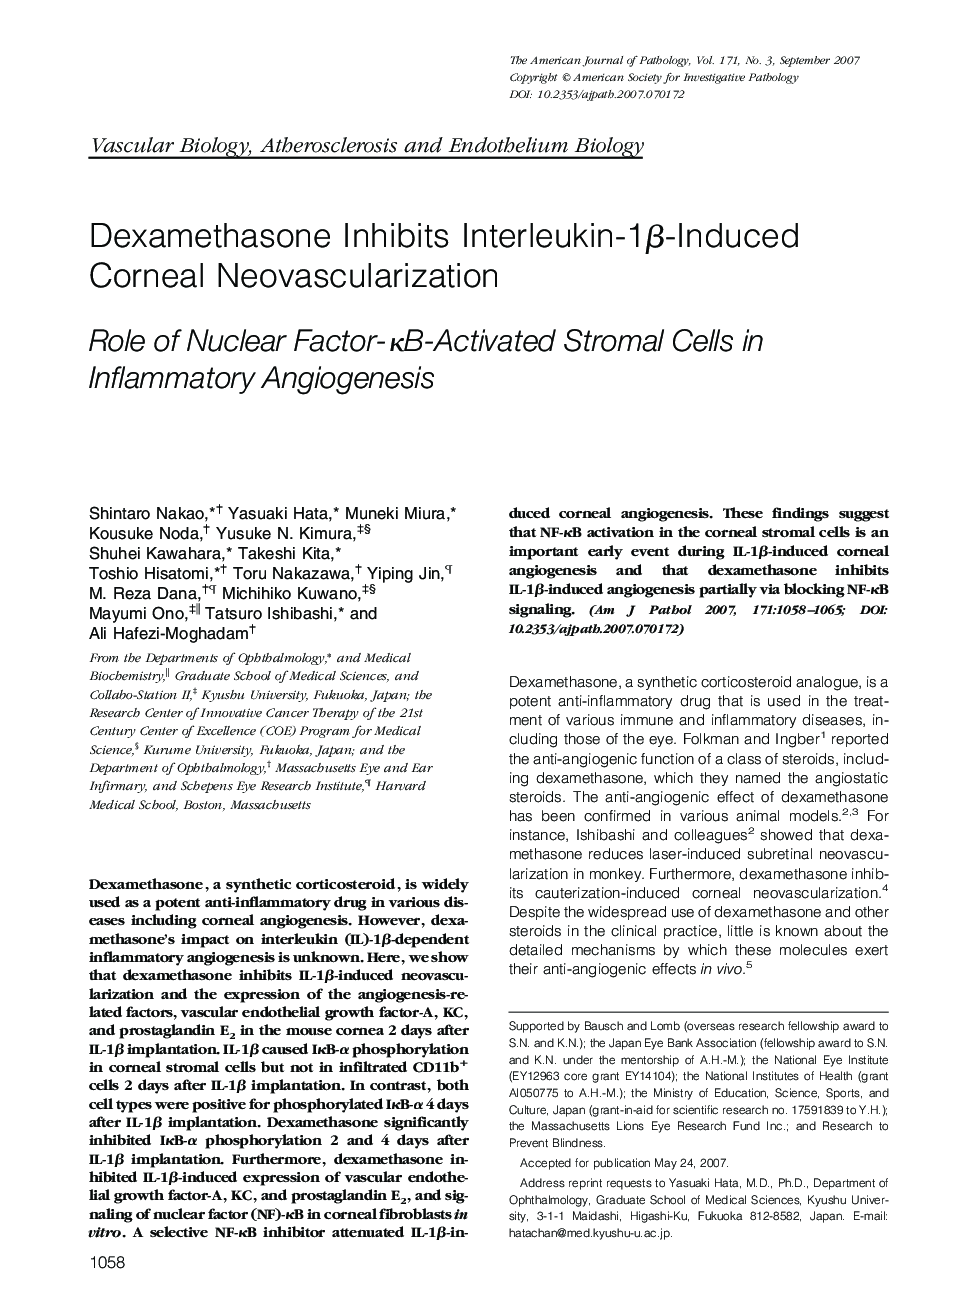 Regular ArticlesDexamethasone Inhibits Interleukin-1Î²-Induced Corneal Neovascularization: Role of Nuclear Factor-ÎºB-Activated Stromal Cells in Inflammatory Angiogenesis